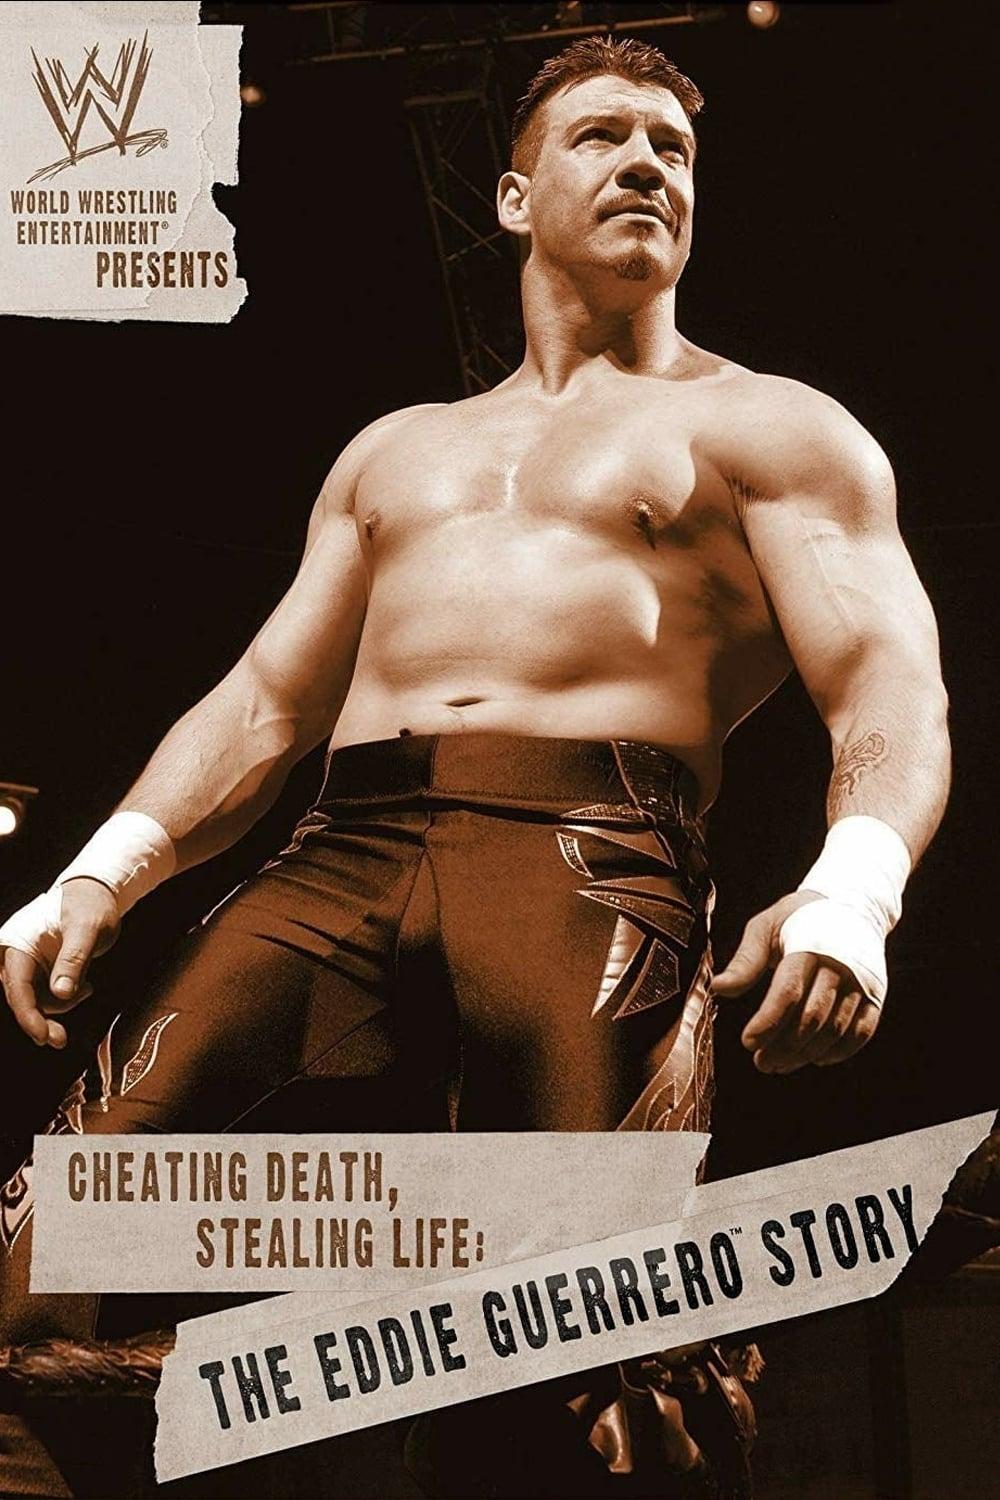 WWE: Cheating Death, Stealing Life: The Eddie Guerrero Story poster